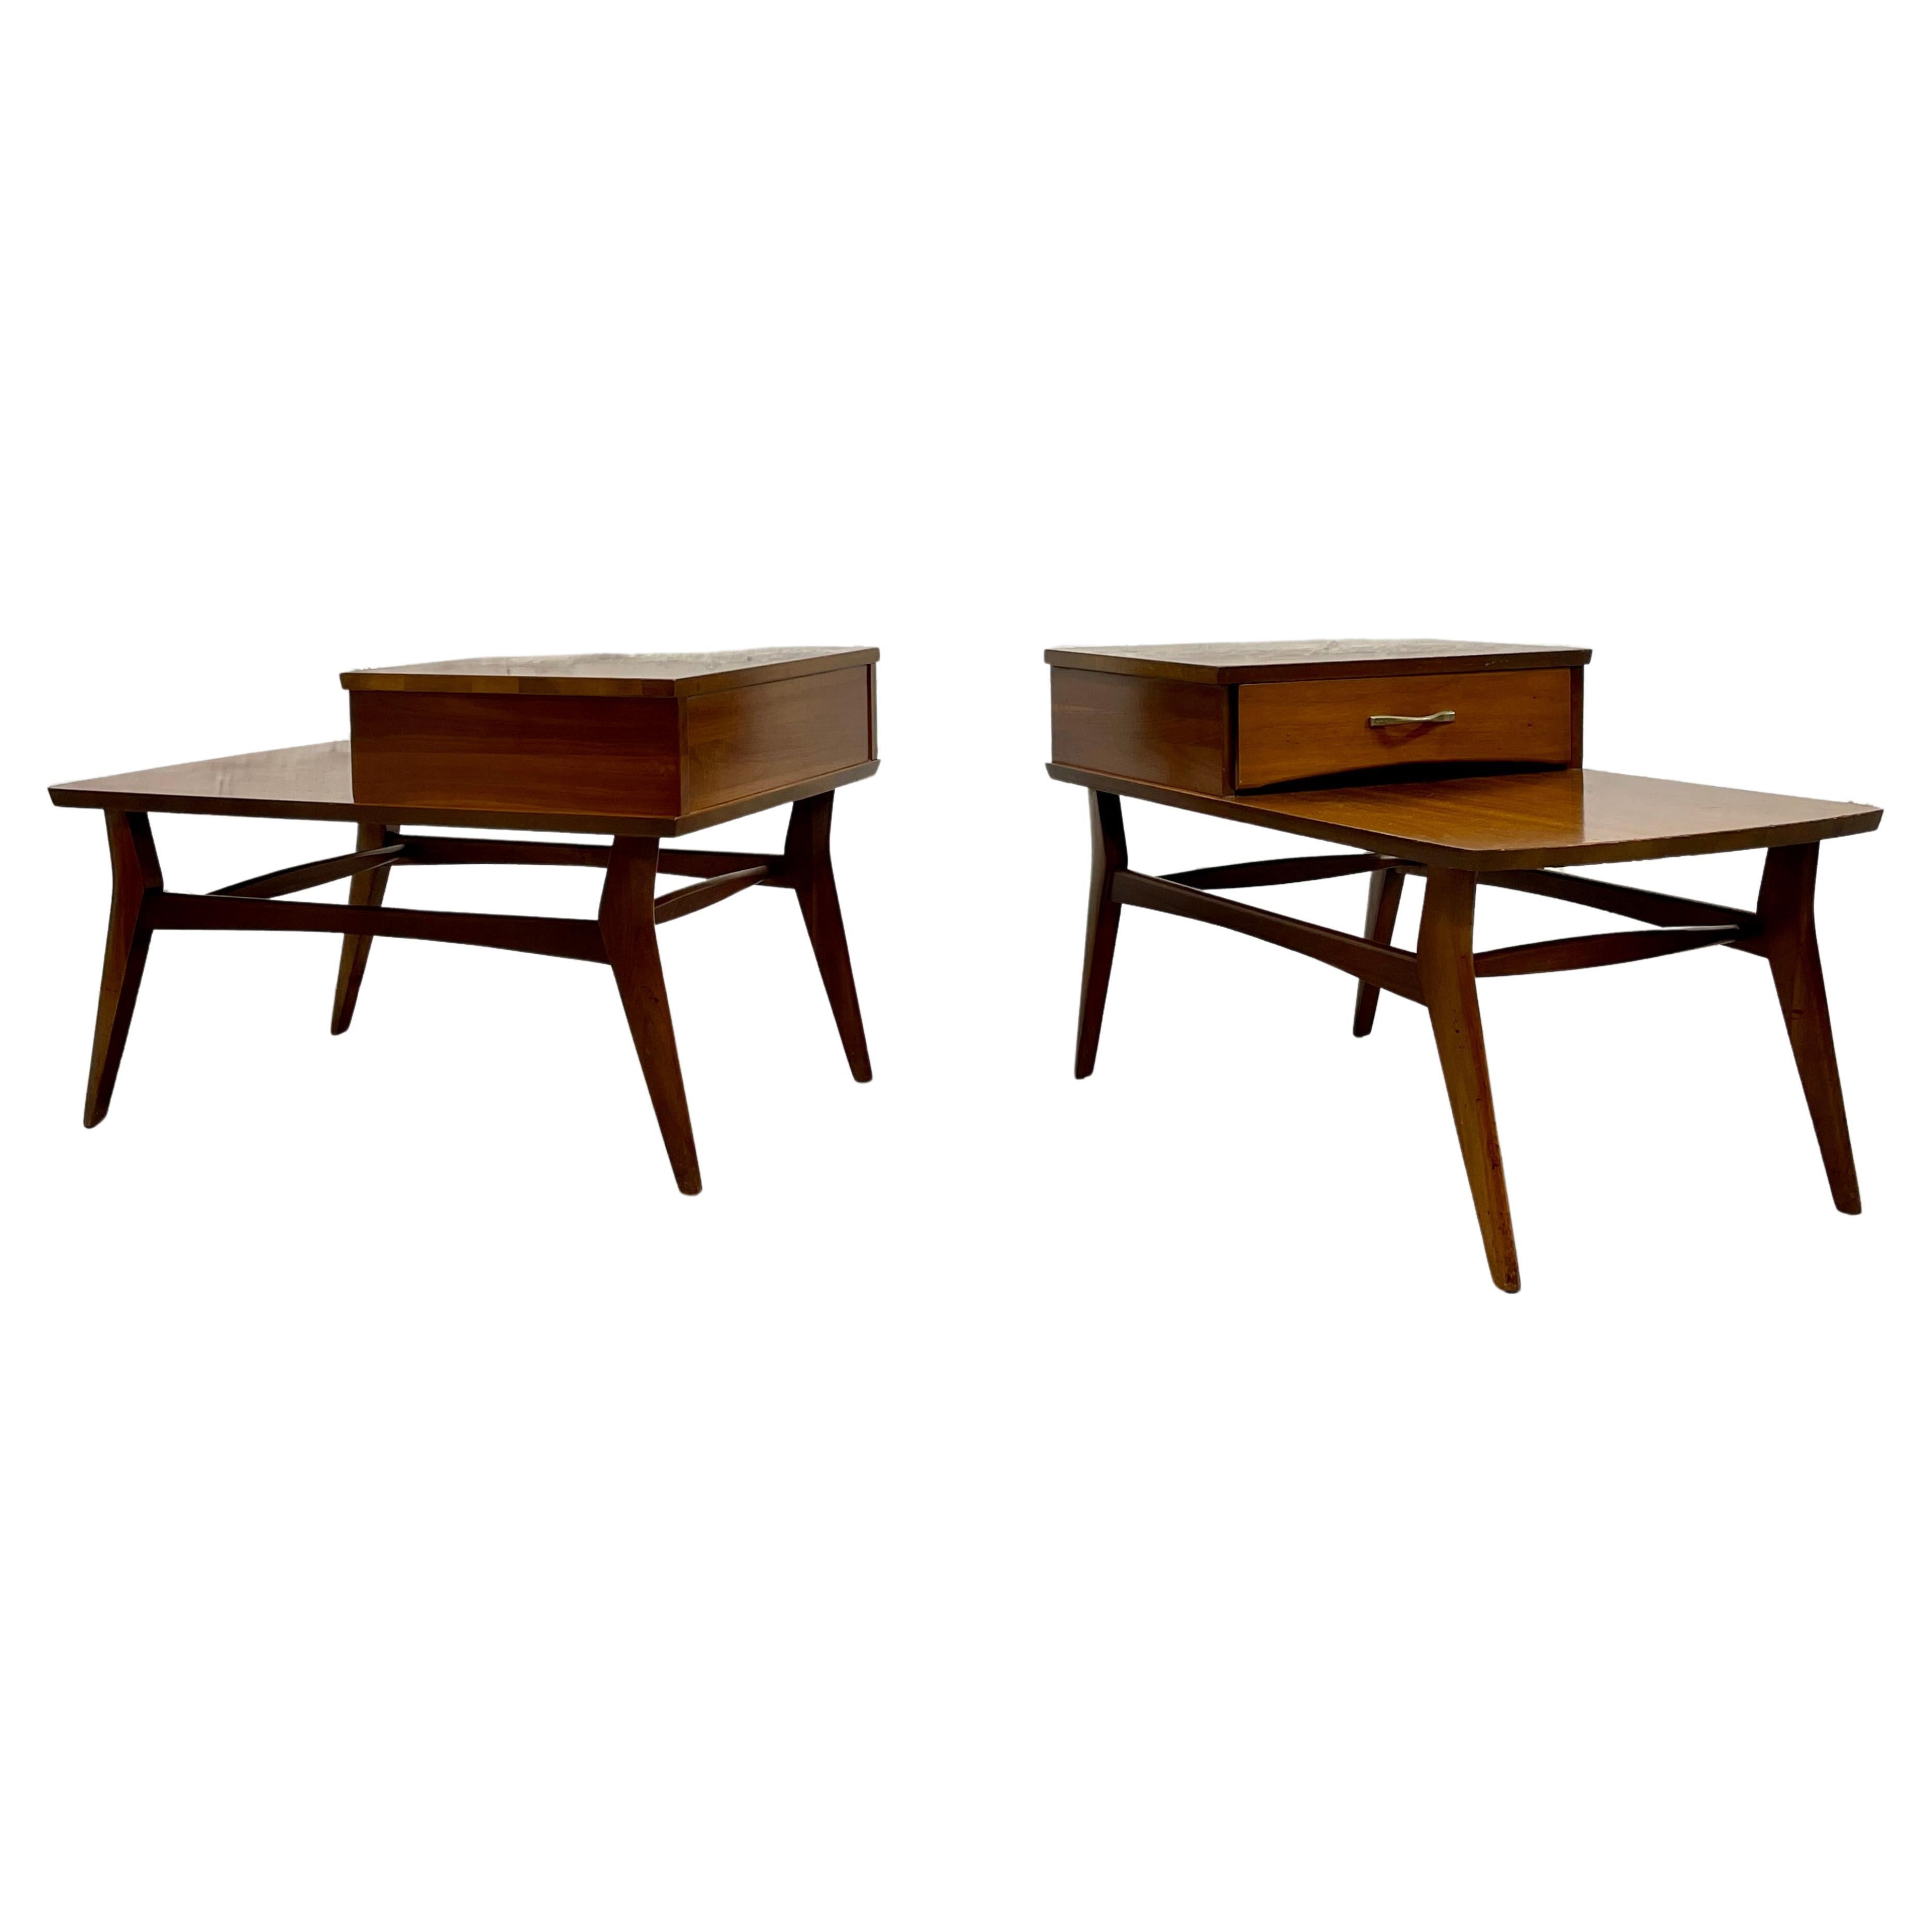 Mid Century MODERN Solid WALNUT Tiered End TABLES by Mersman, c. 1960's For Sale